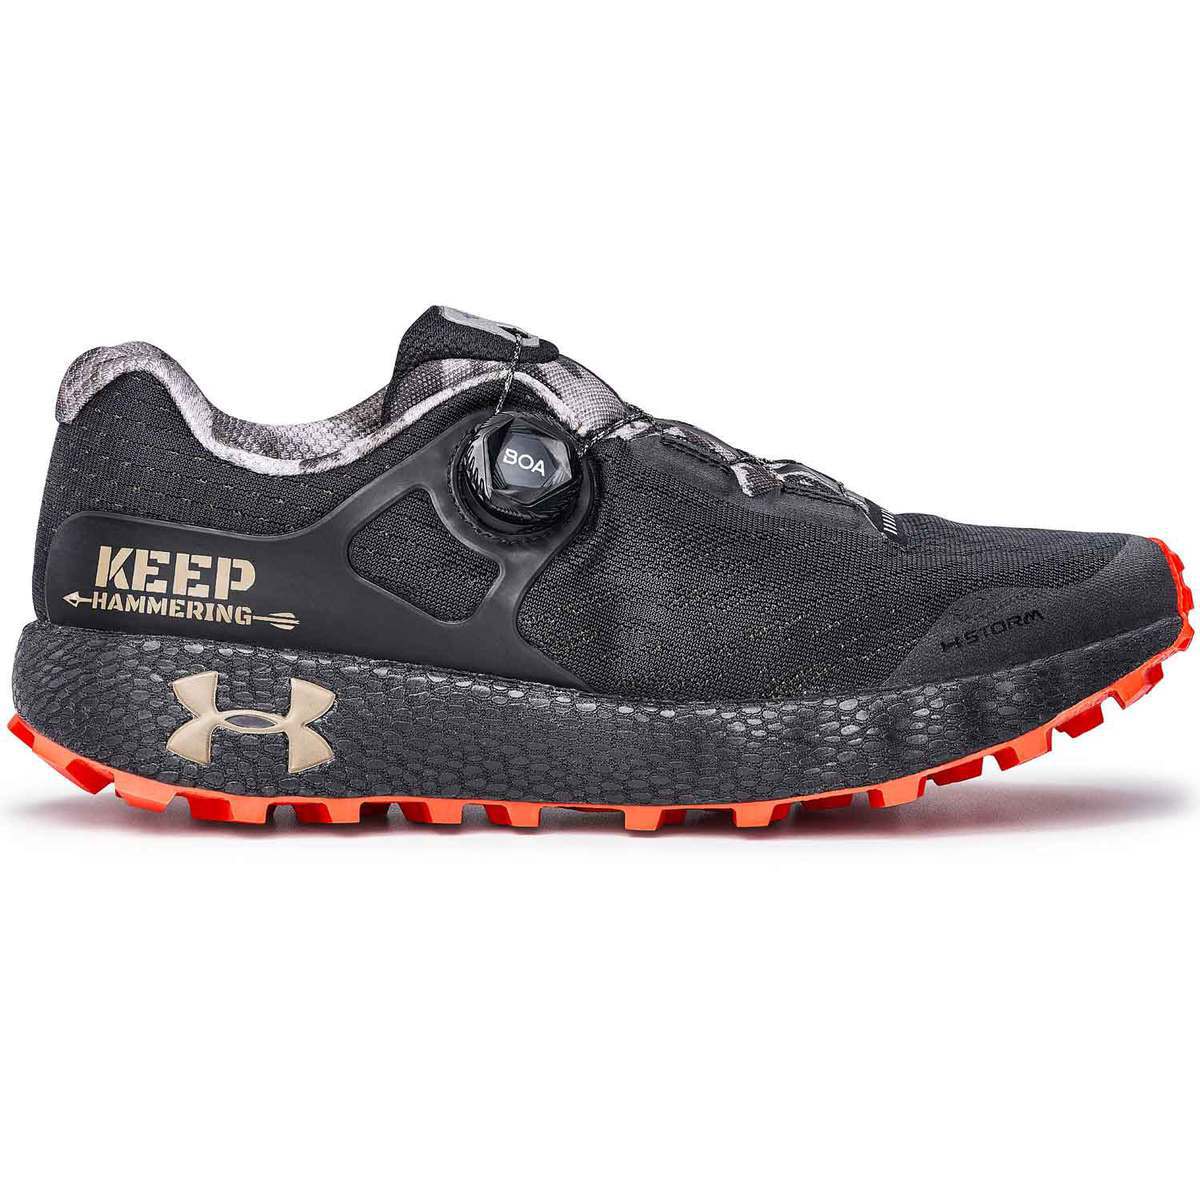 Under Armour Men's HOVR Machina Off-Road Running Shoes - Black - Size